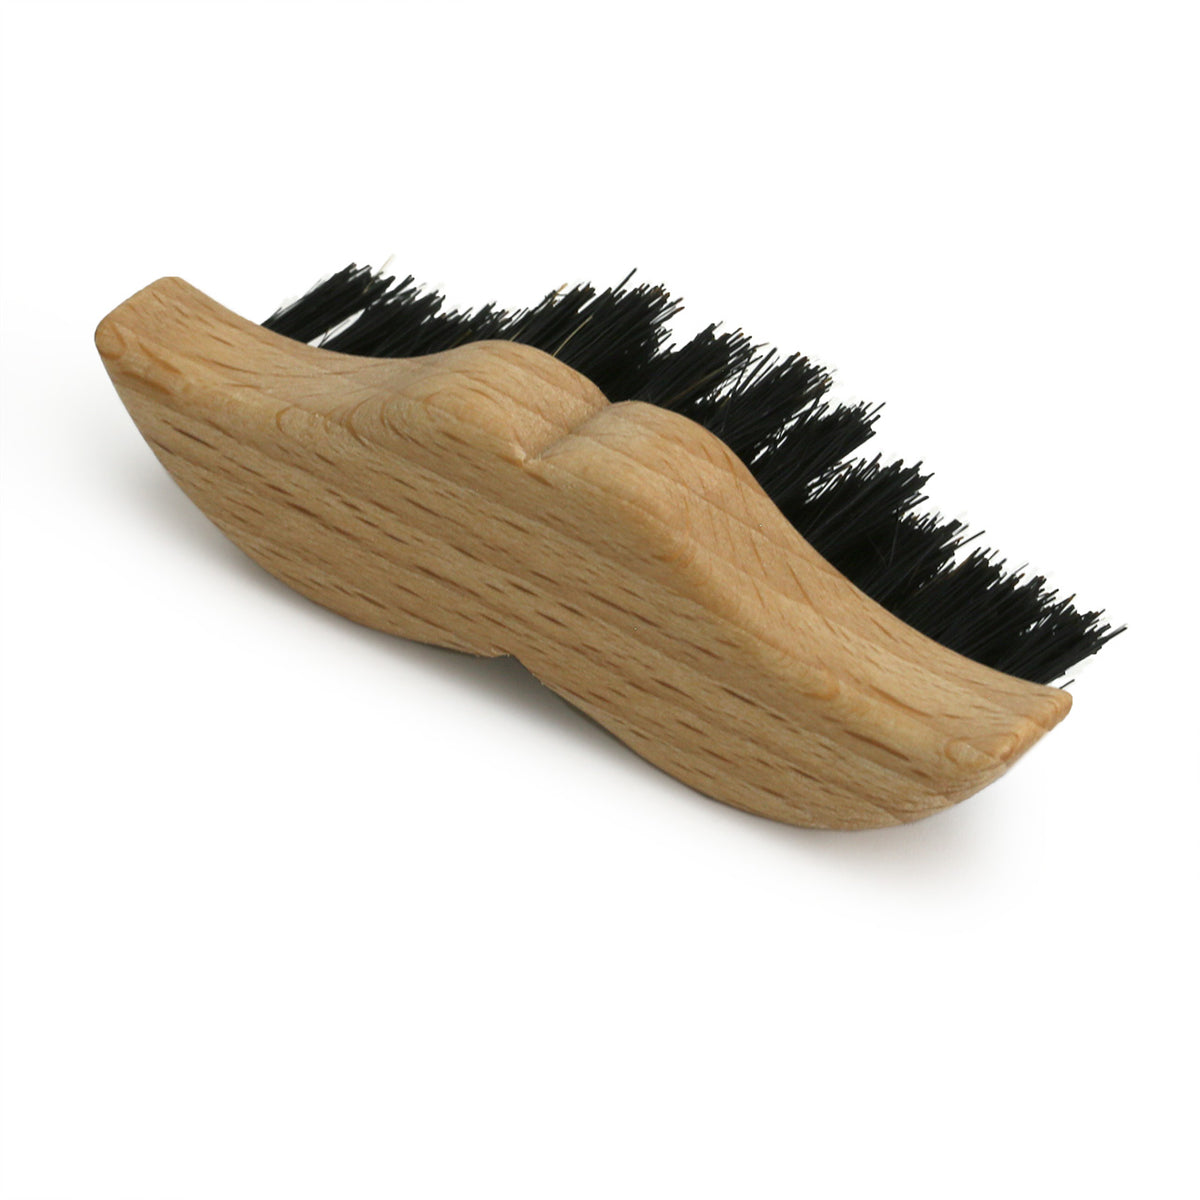 wooden Moustache brush in  the shape of a moustache, three-quarter angle from above showing the length of the stiff bristles